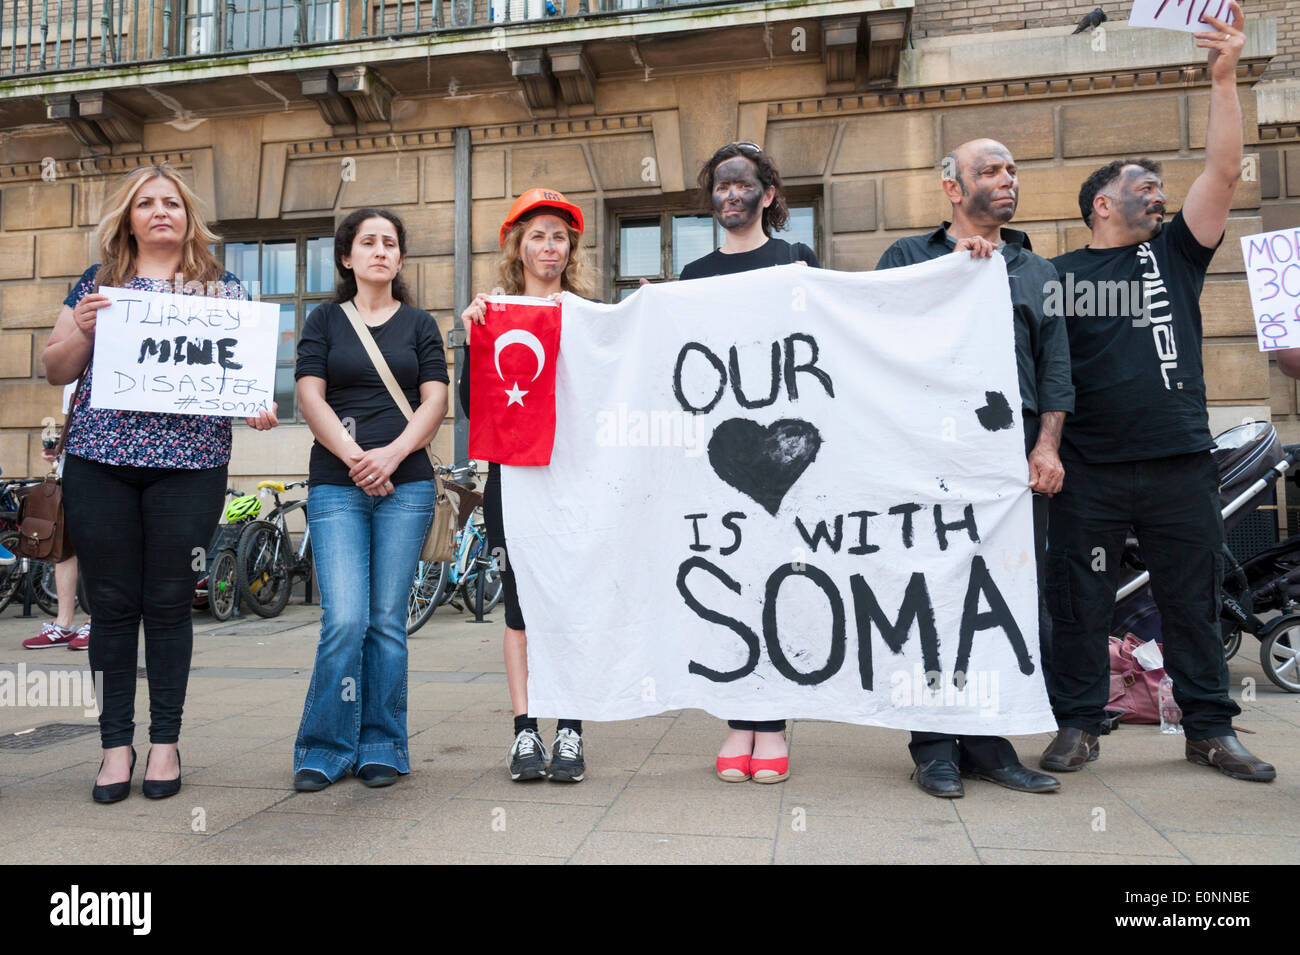 Cambridge UK 17th May 2014. People demonstrate about the mining disaster at Soma, Turkey where 301 people died after an explosion on Tuesday this week.  Around 15 people held a silent protest whilest holding placards outside the Cambridge Guildhall. Credit Julian Eales/Alamy Live News Stock Photo